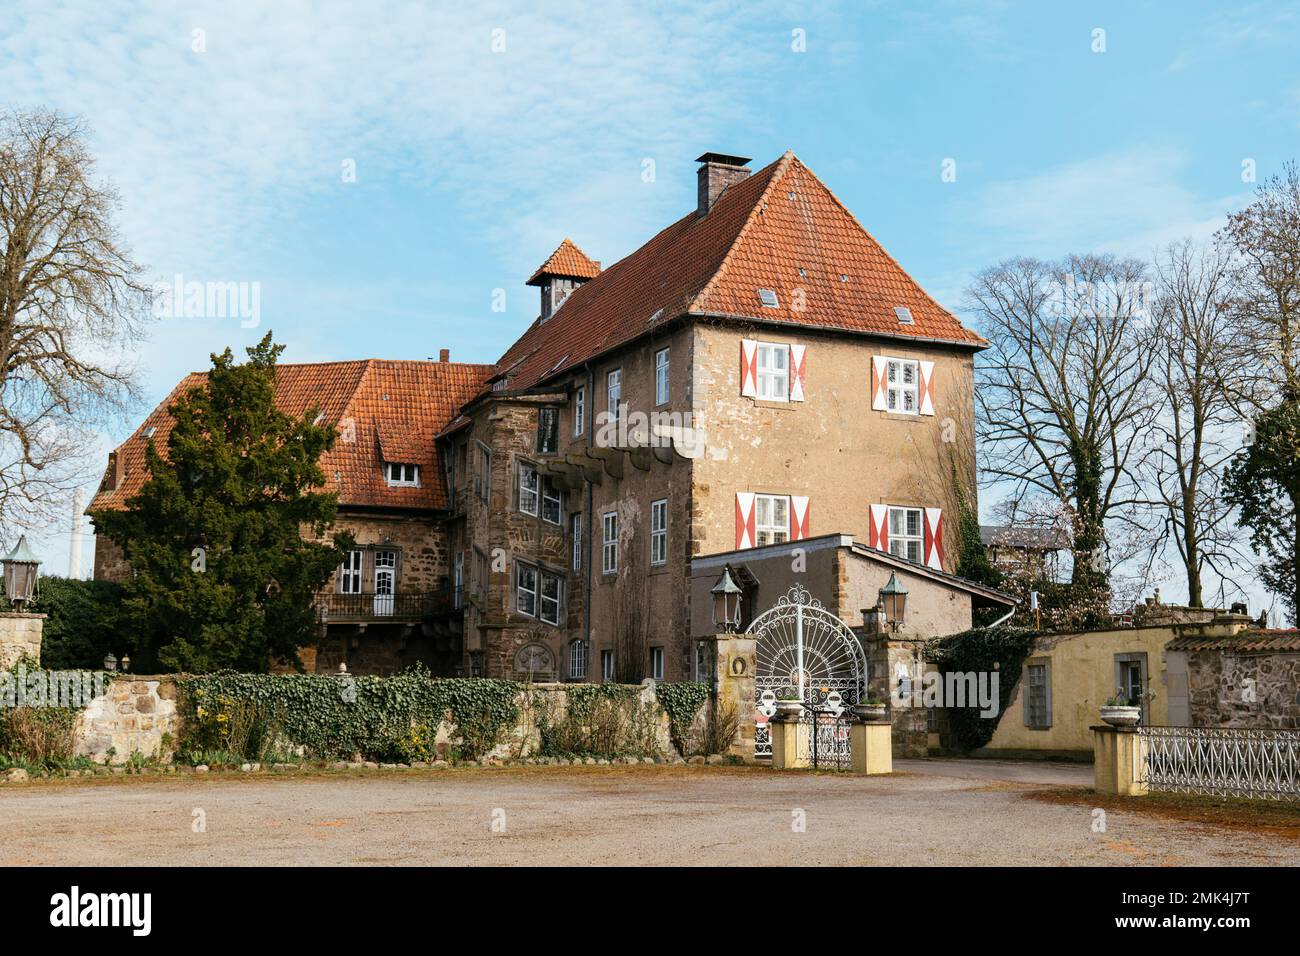 Historic castle in Petershagen, now used as hotel and restaurant. Stock Photo